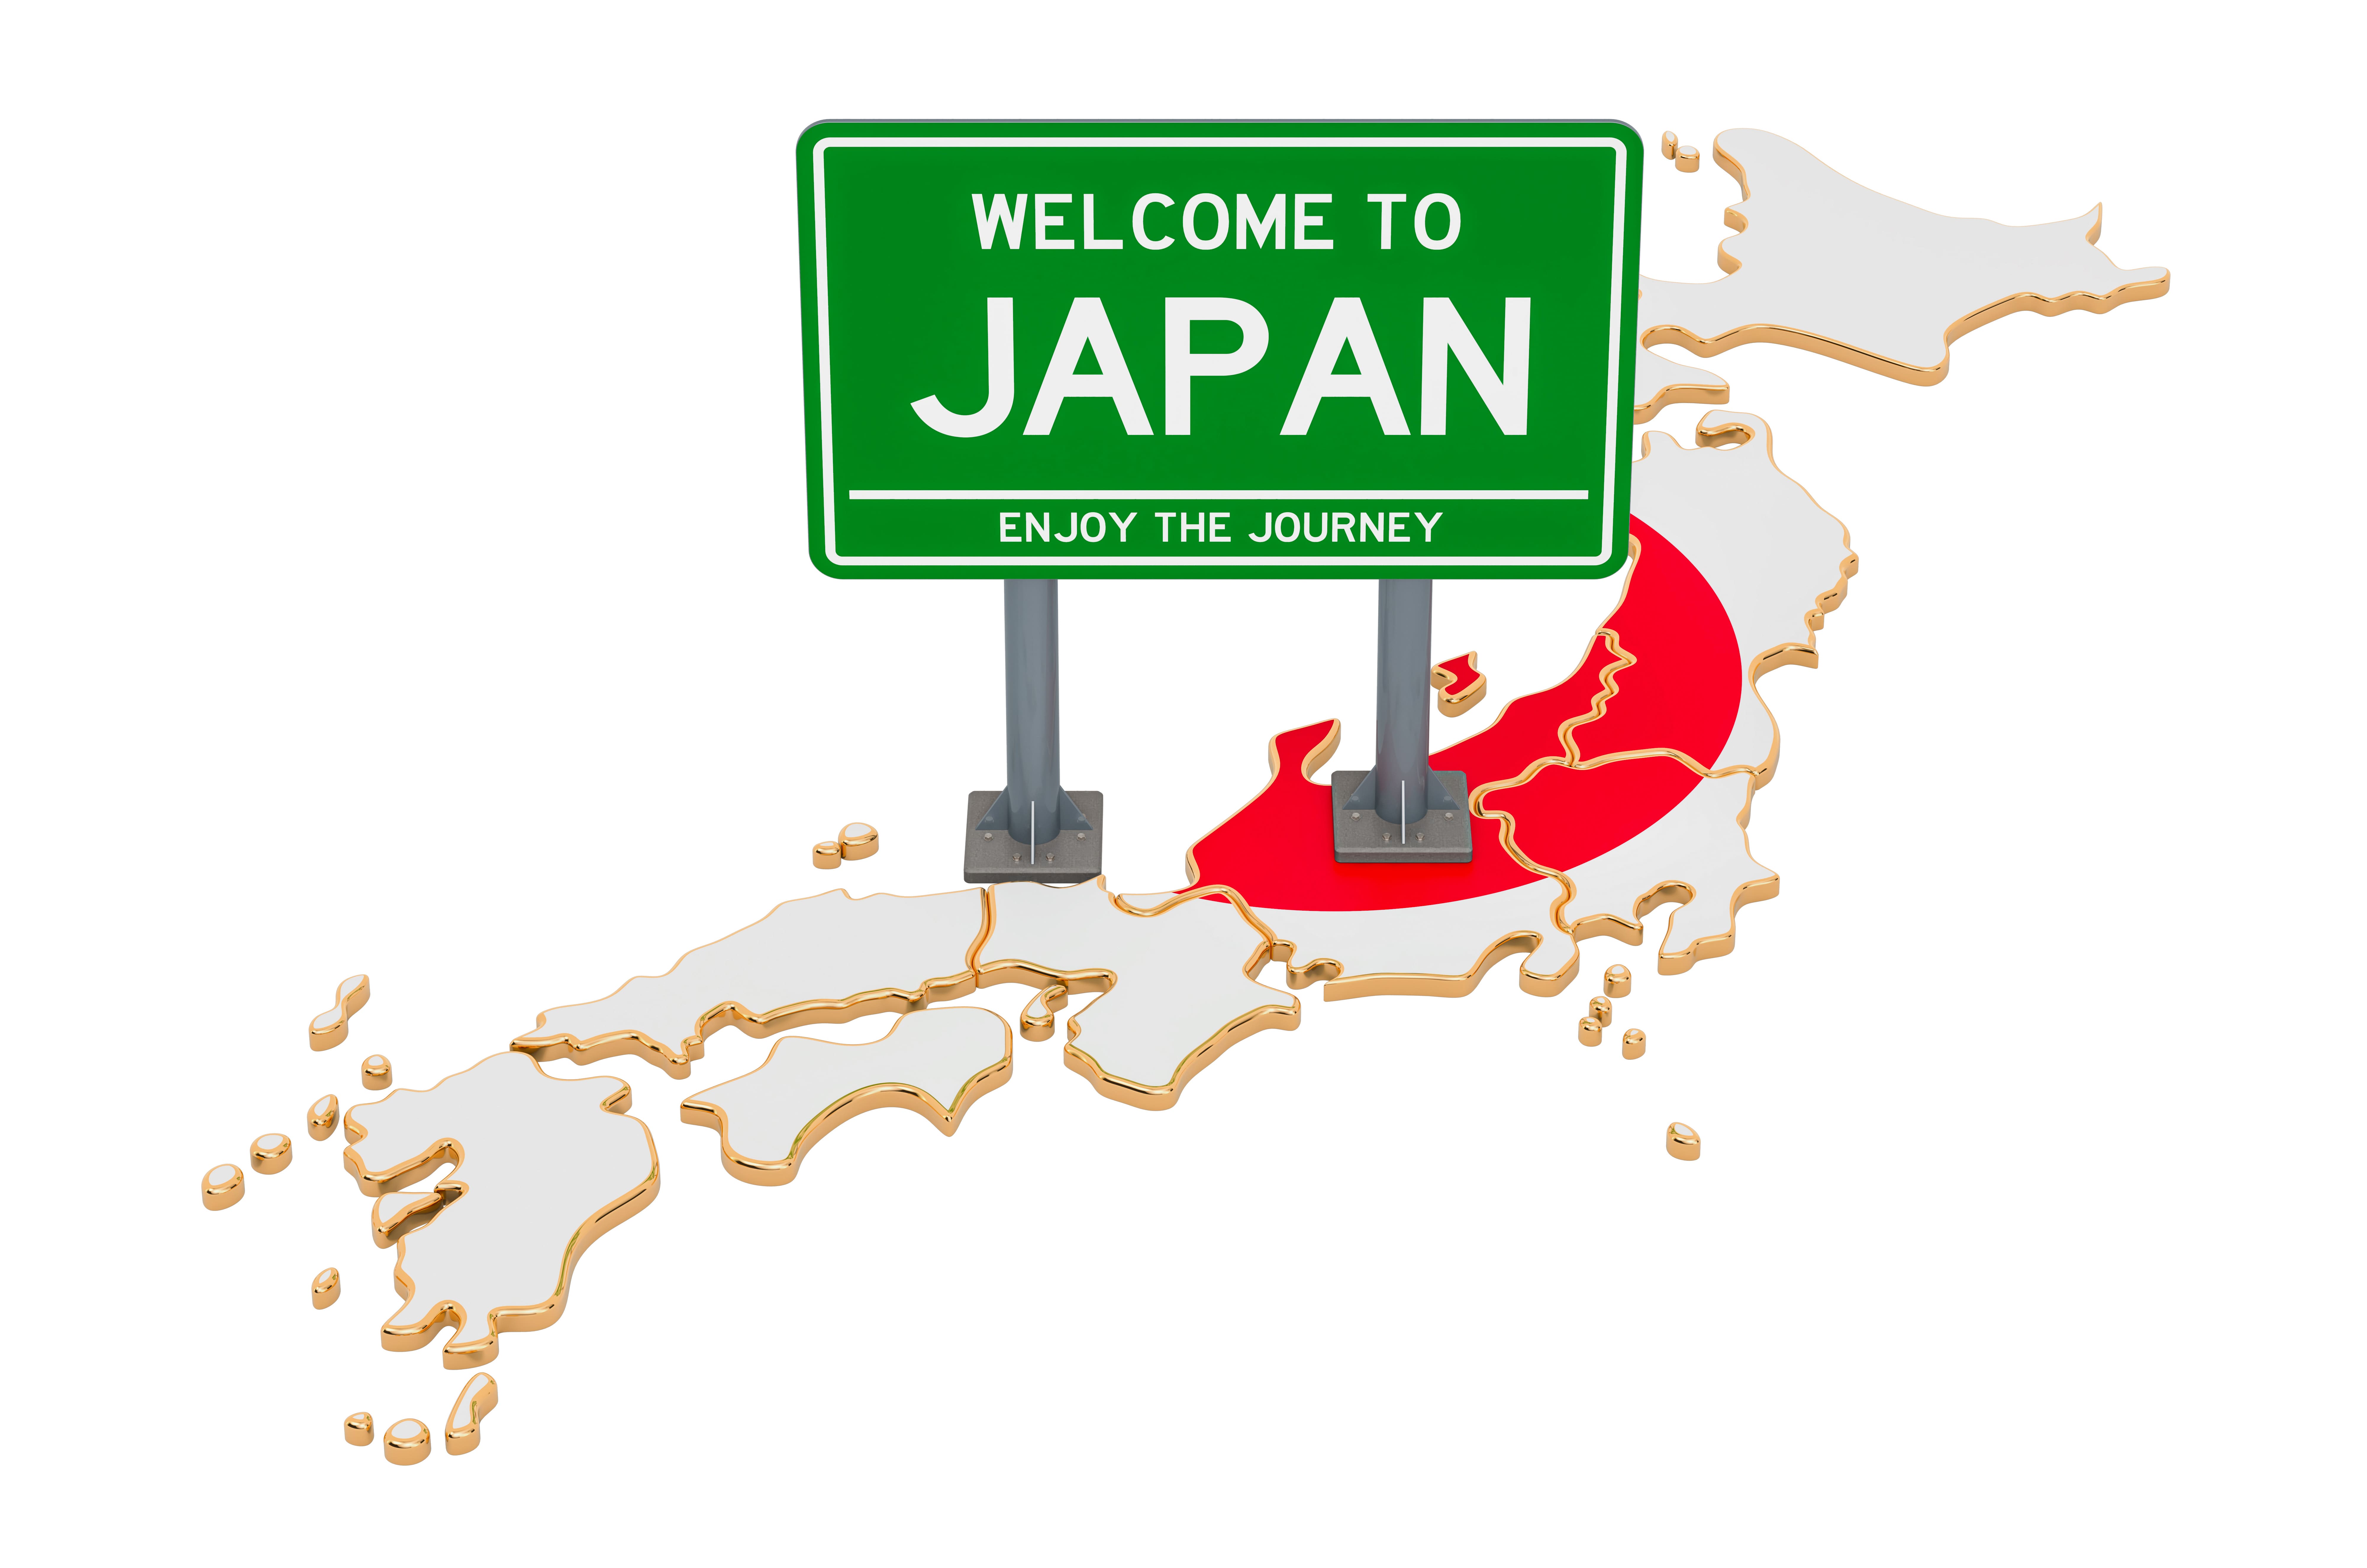 WELCOME TO JAPAN